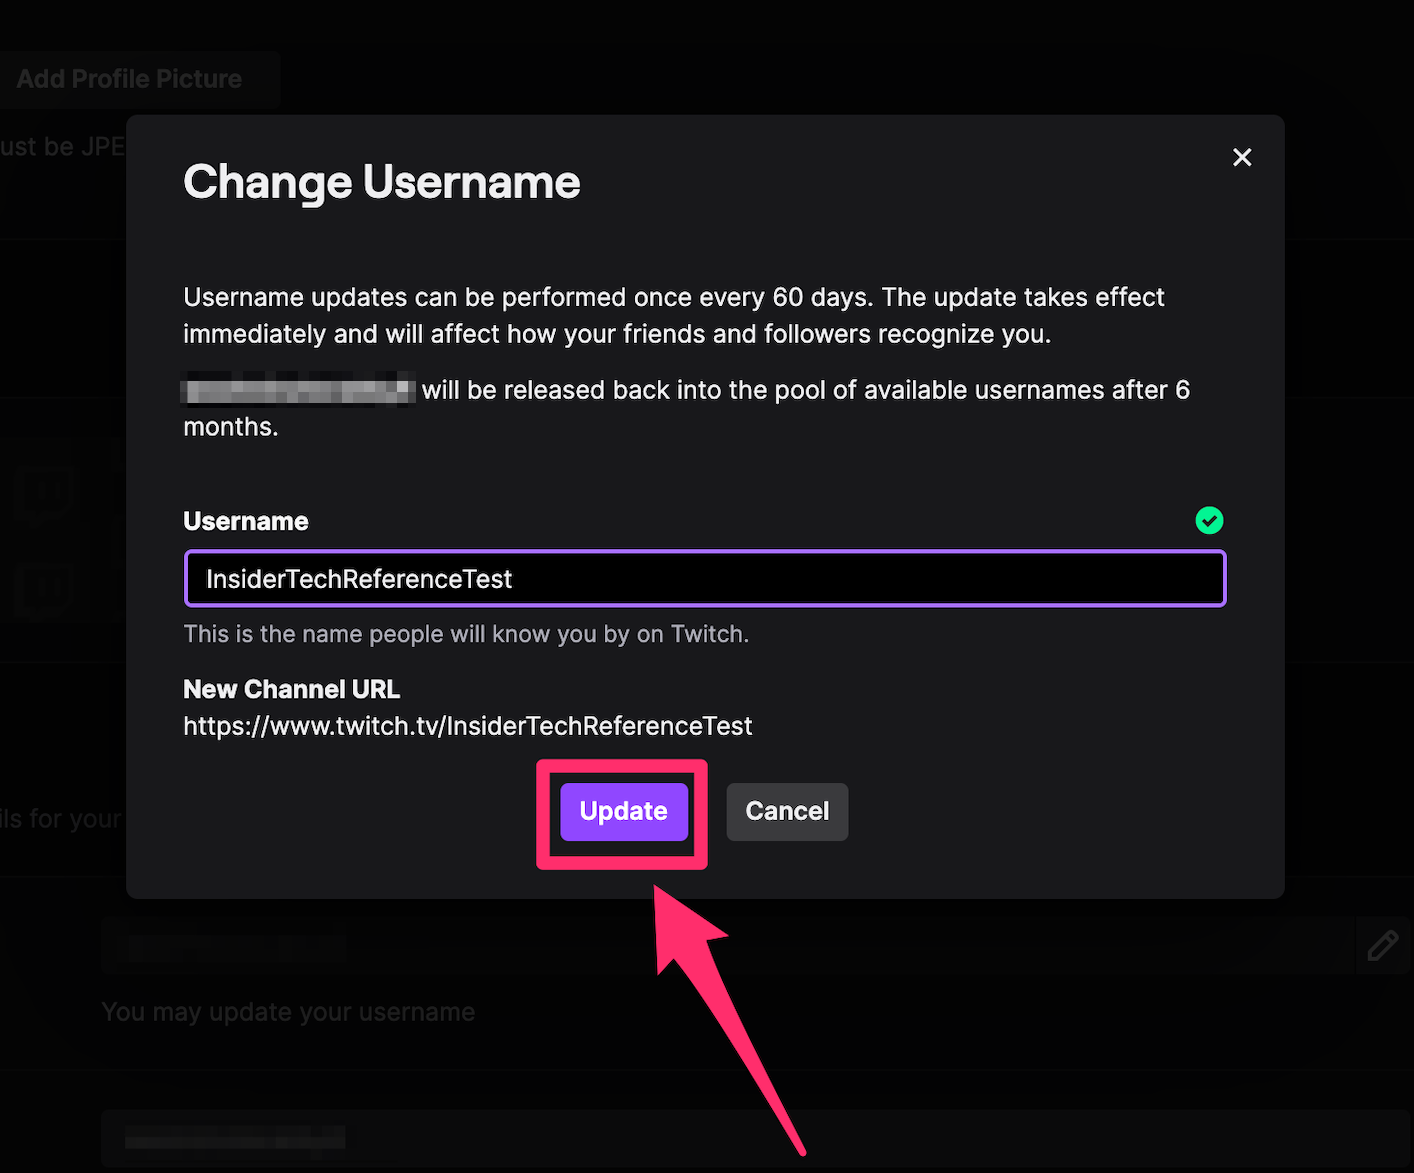 Screenshot of the Change Username pop-up window on the Twitch website